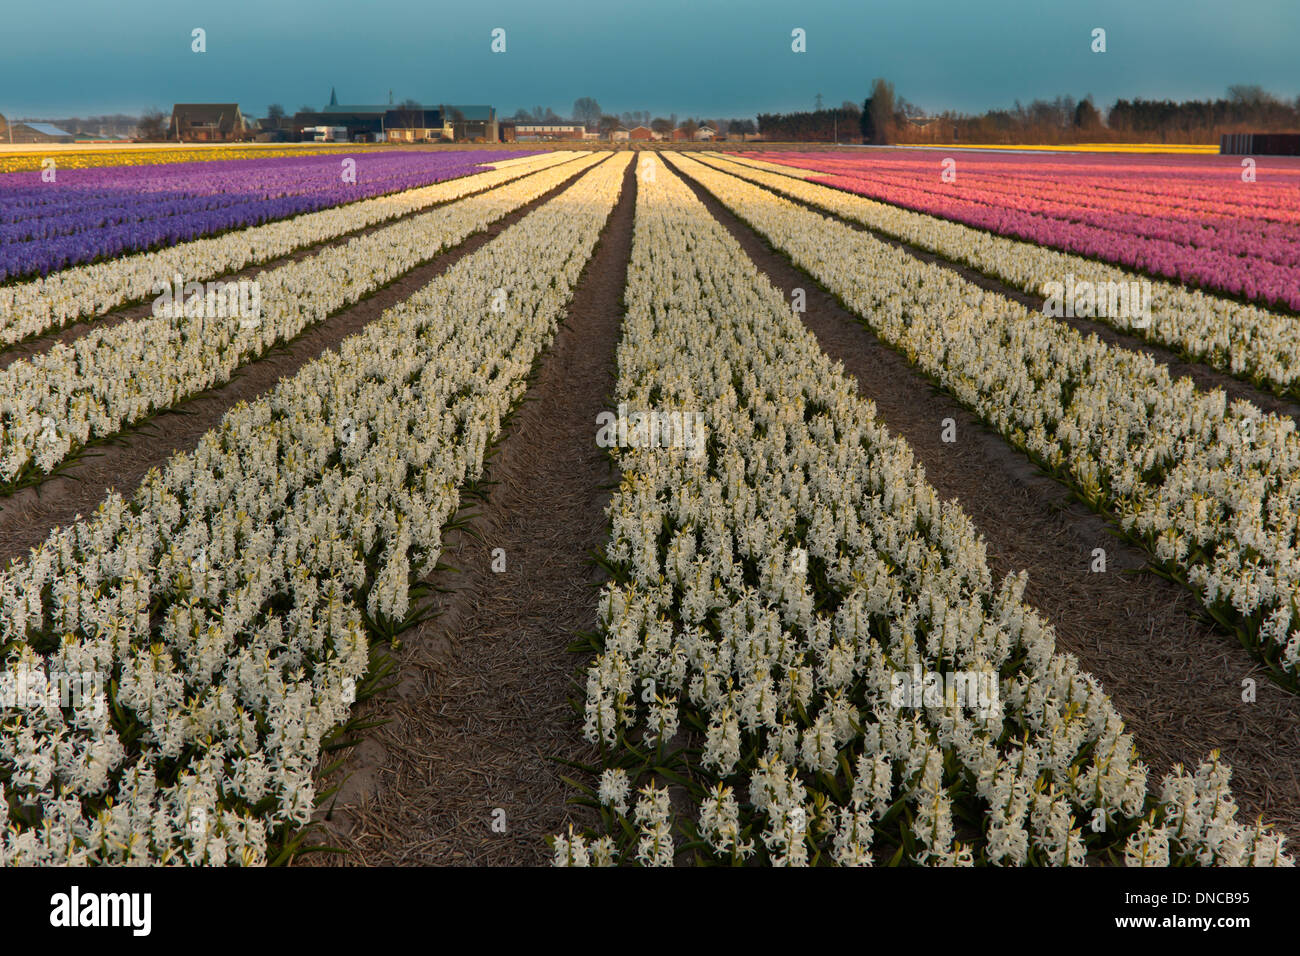 Colorful hyacinths blooming at full peak, catching the light of the setting sun, Sassenheim, South Holland, The Netherlands. Stock Photo